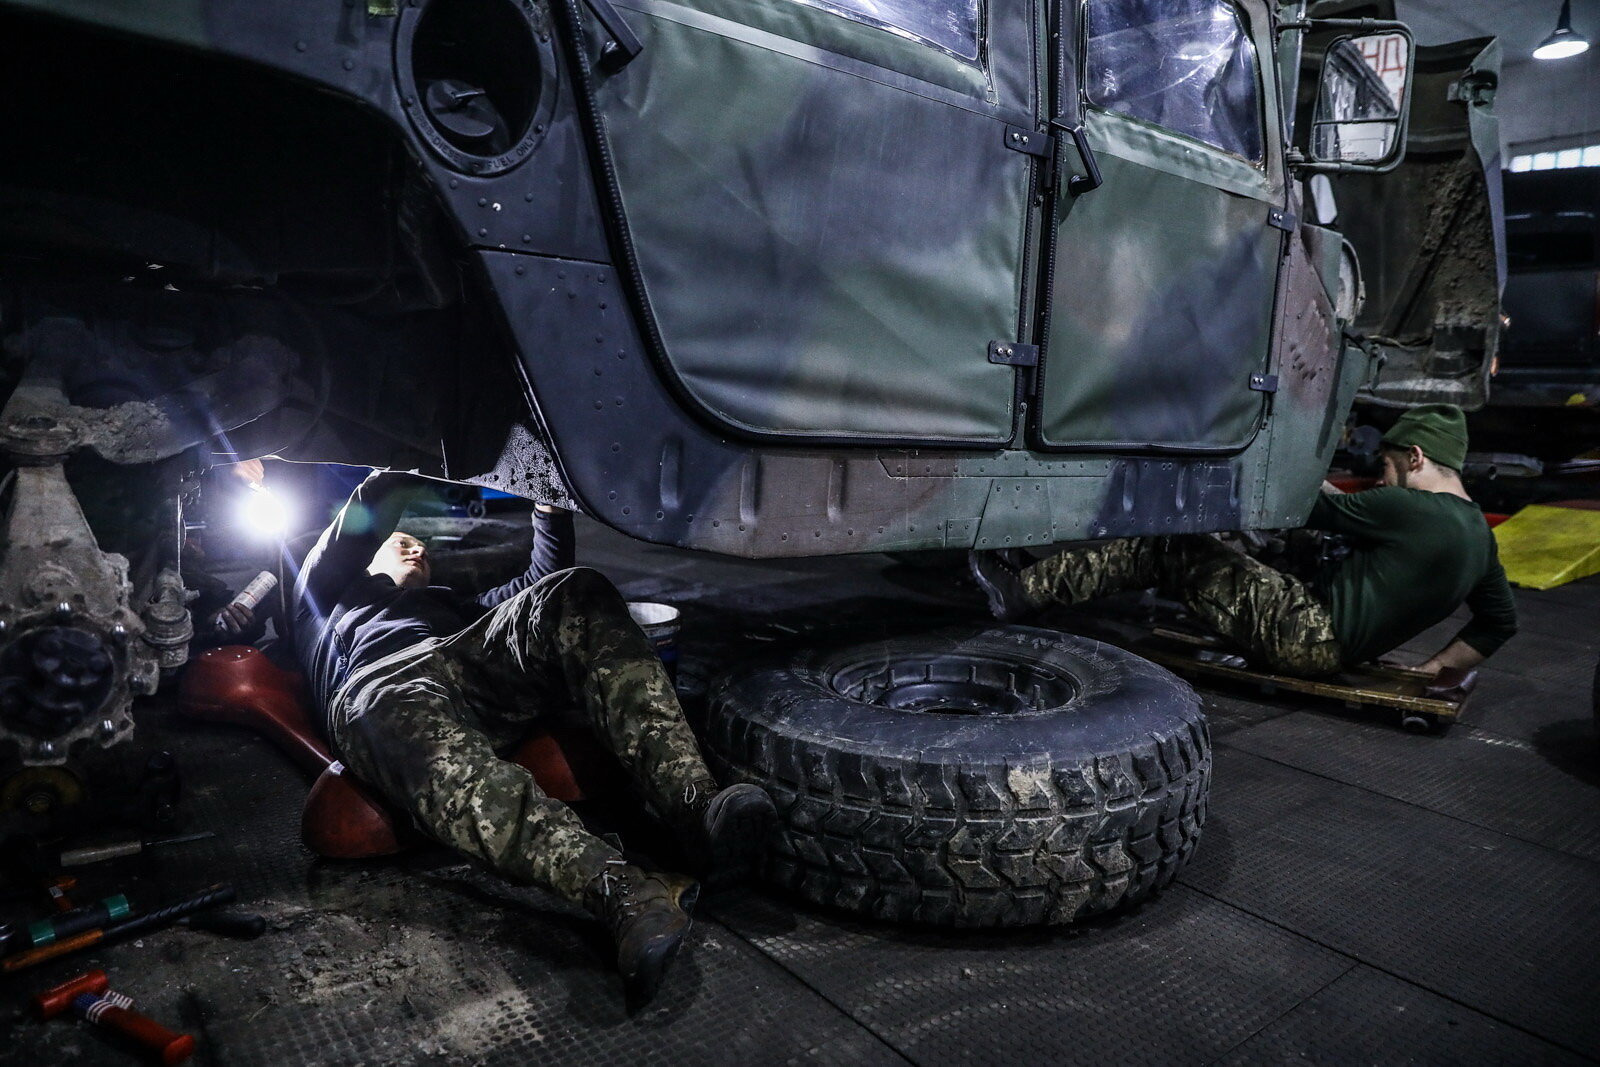 A technician repairs a Humvee vehicle at a Ukrainian army&#8217;s maintenance and overhaul workshop in the city of Zhytomyr on Nov. 20, 2020.